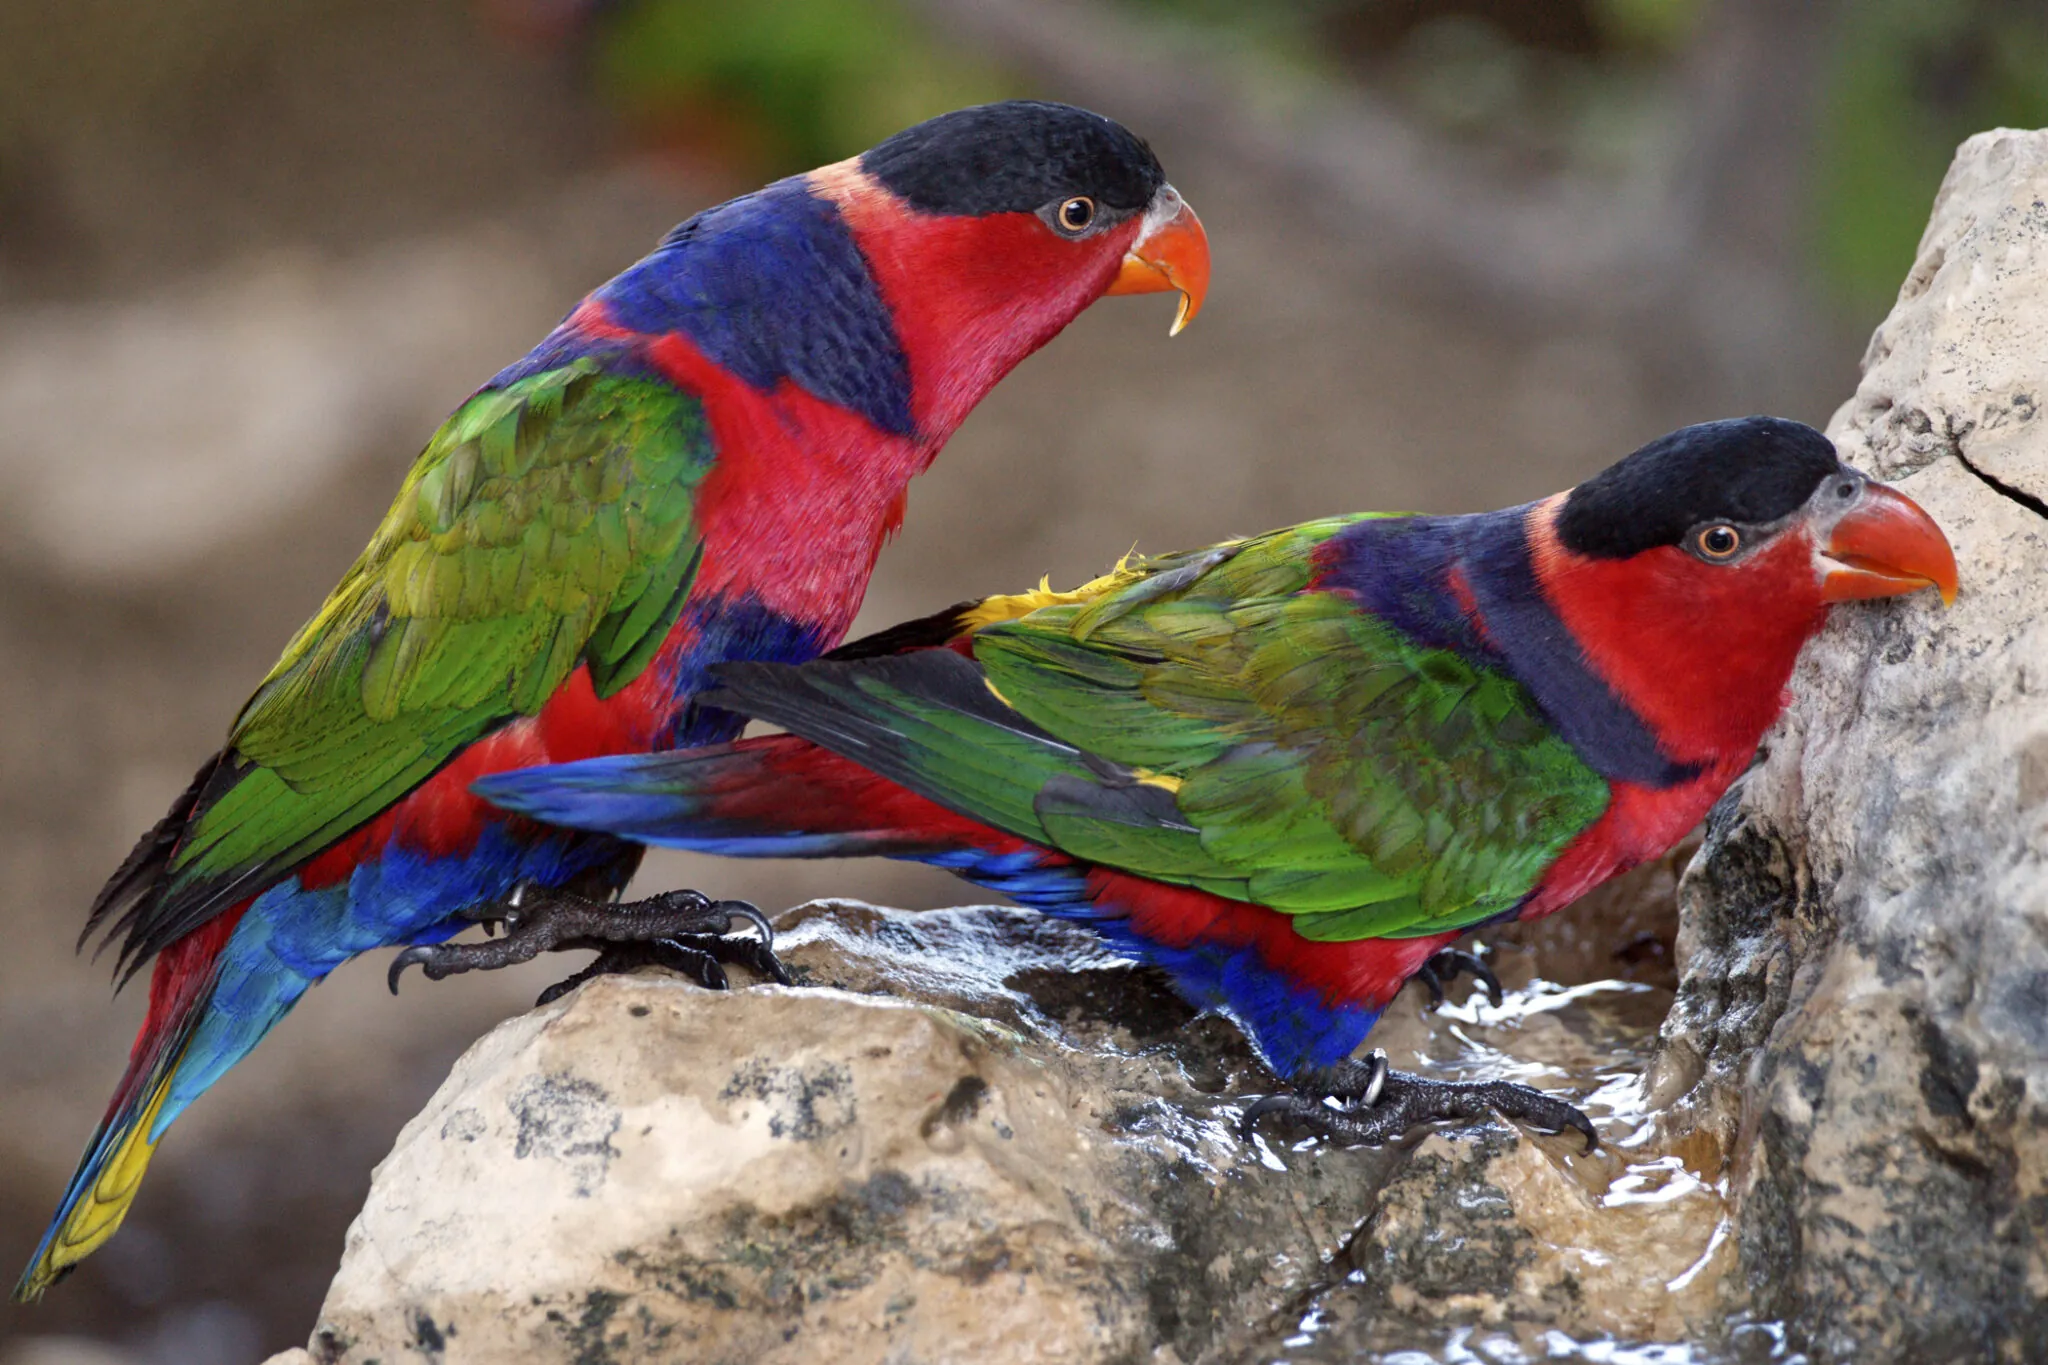 Two black-capped lories on a rock